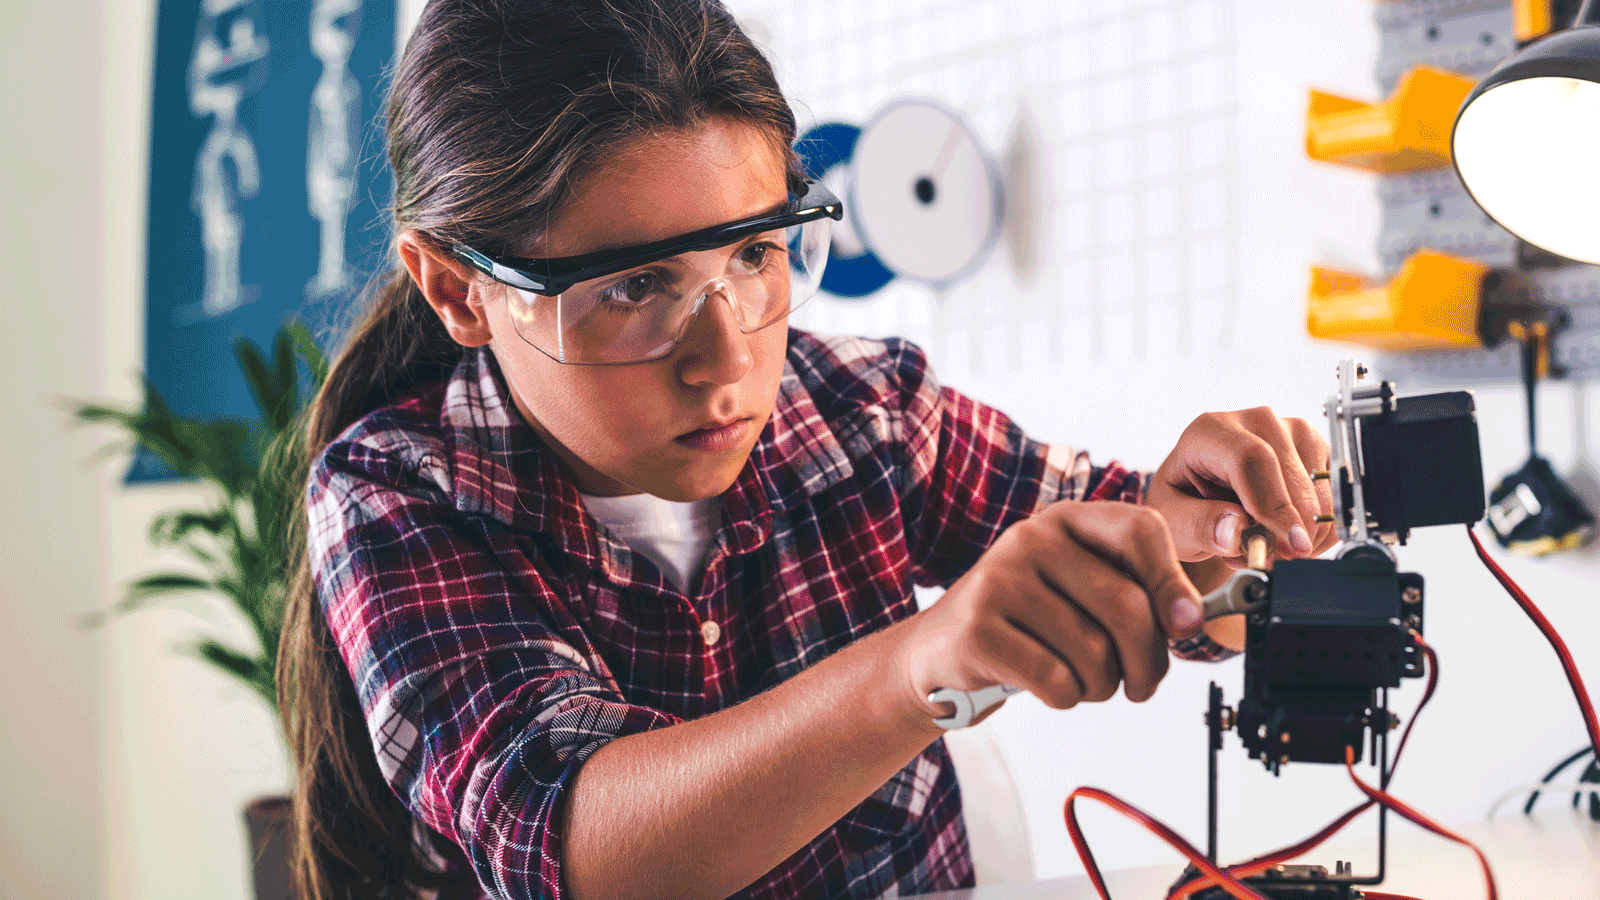 Girls’ continued reduced interest in STEM a ‘serious wake-up call’